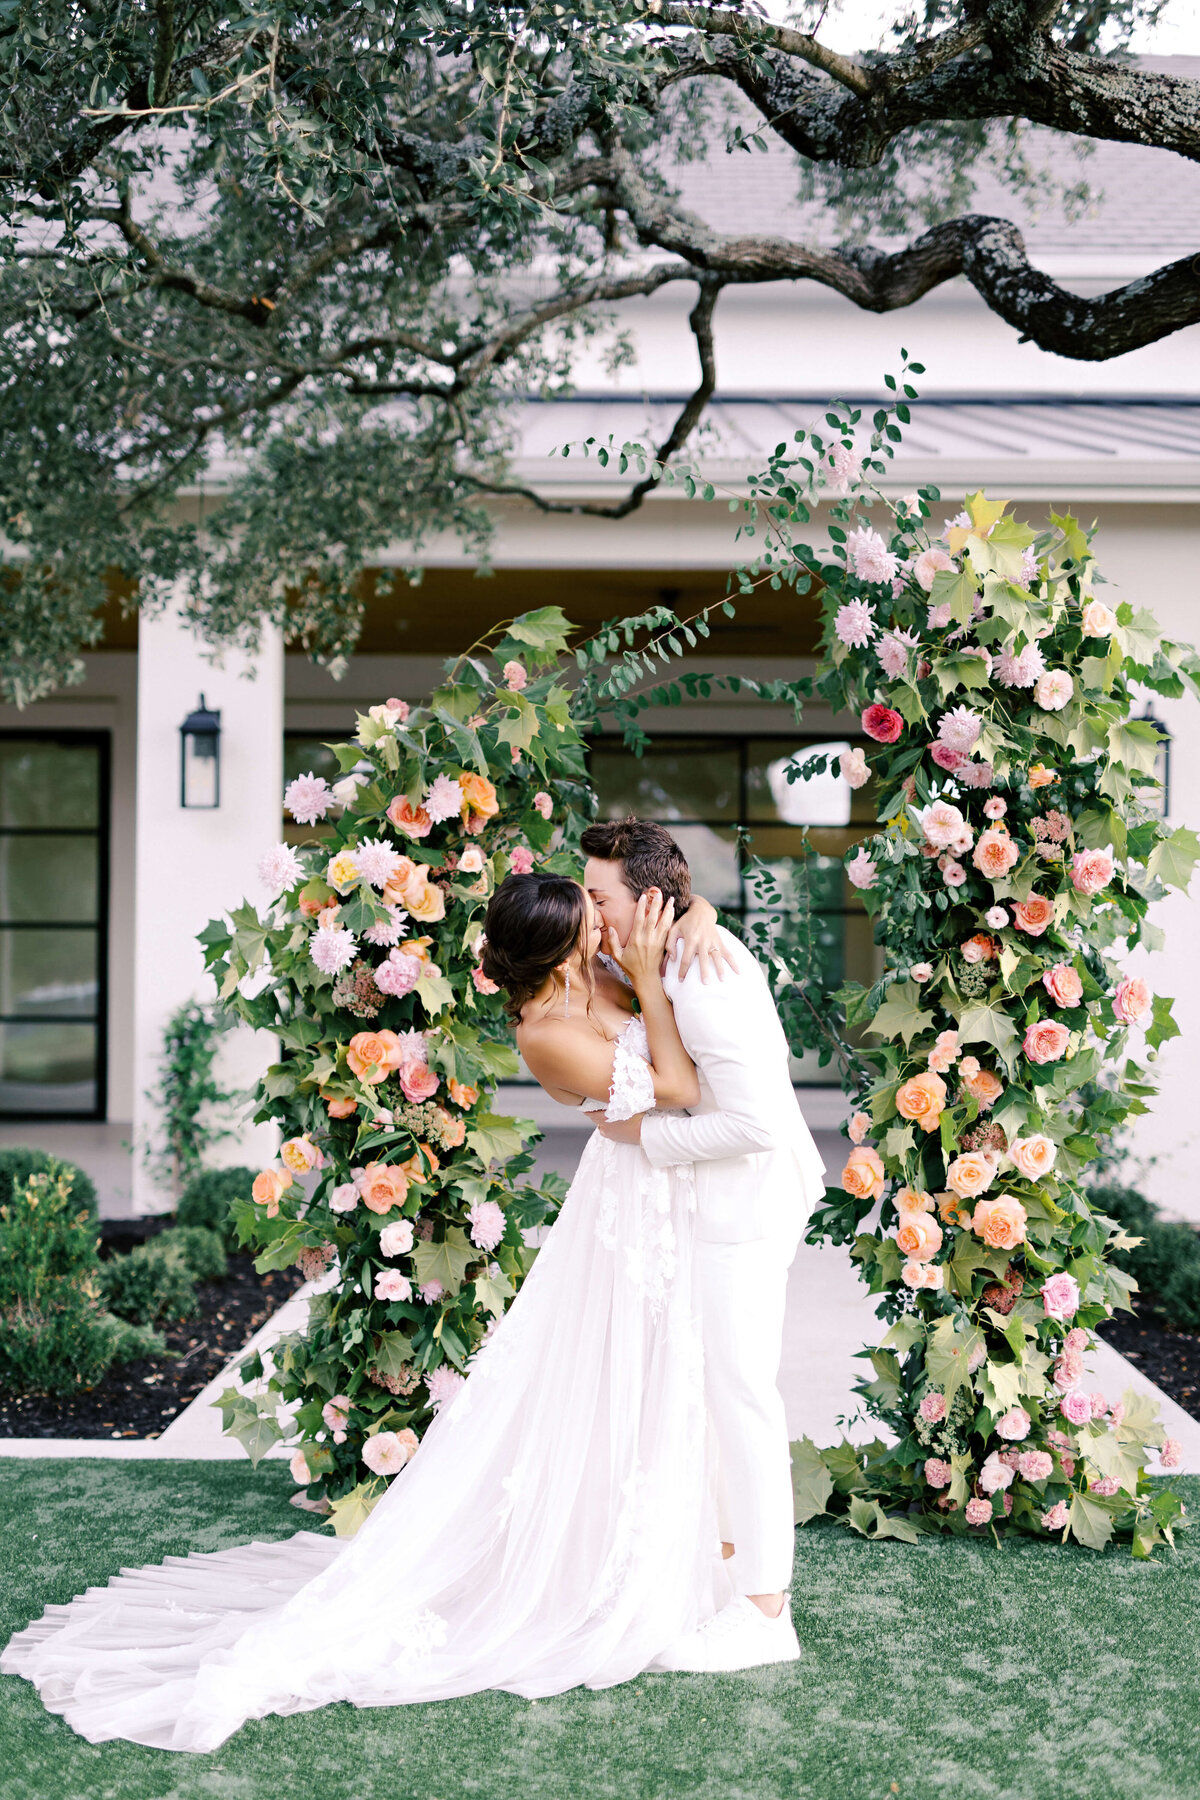 Elopement ceremony with a colorful floral arch